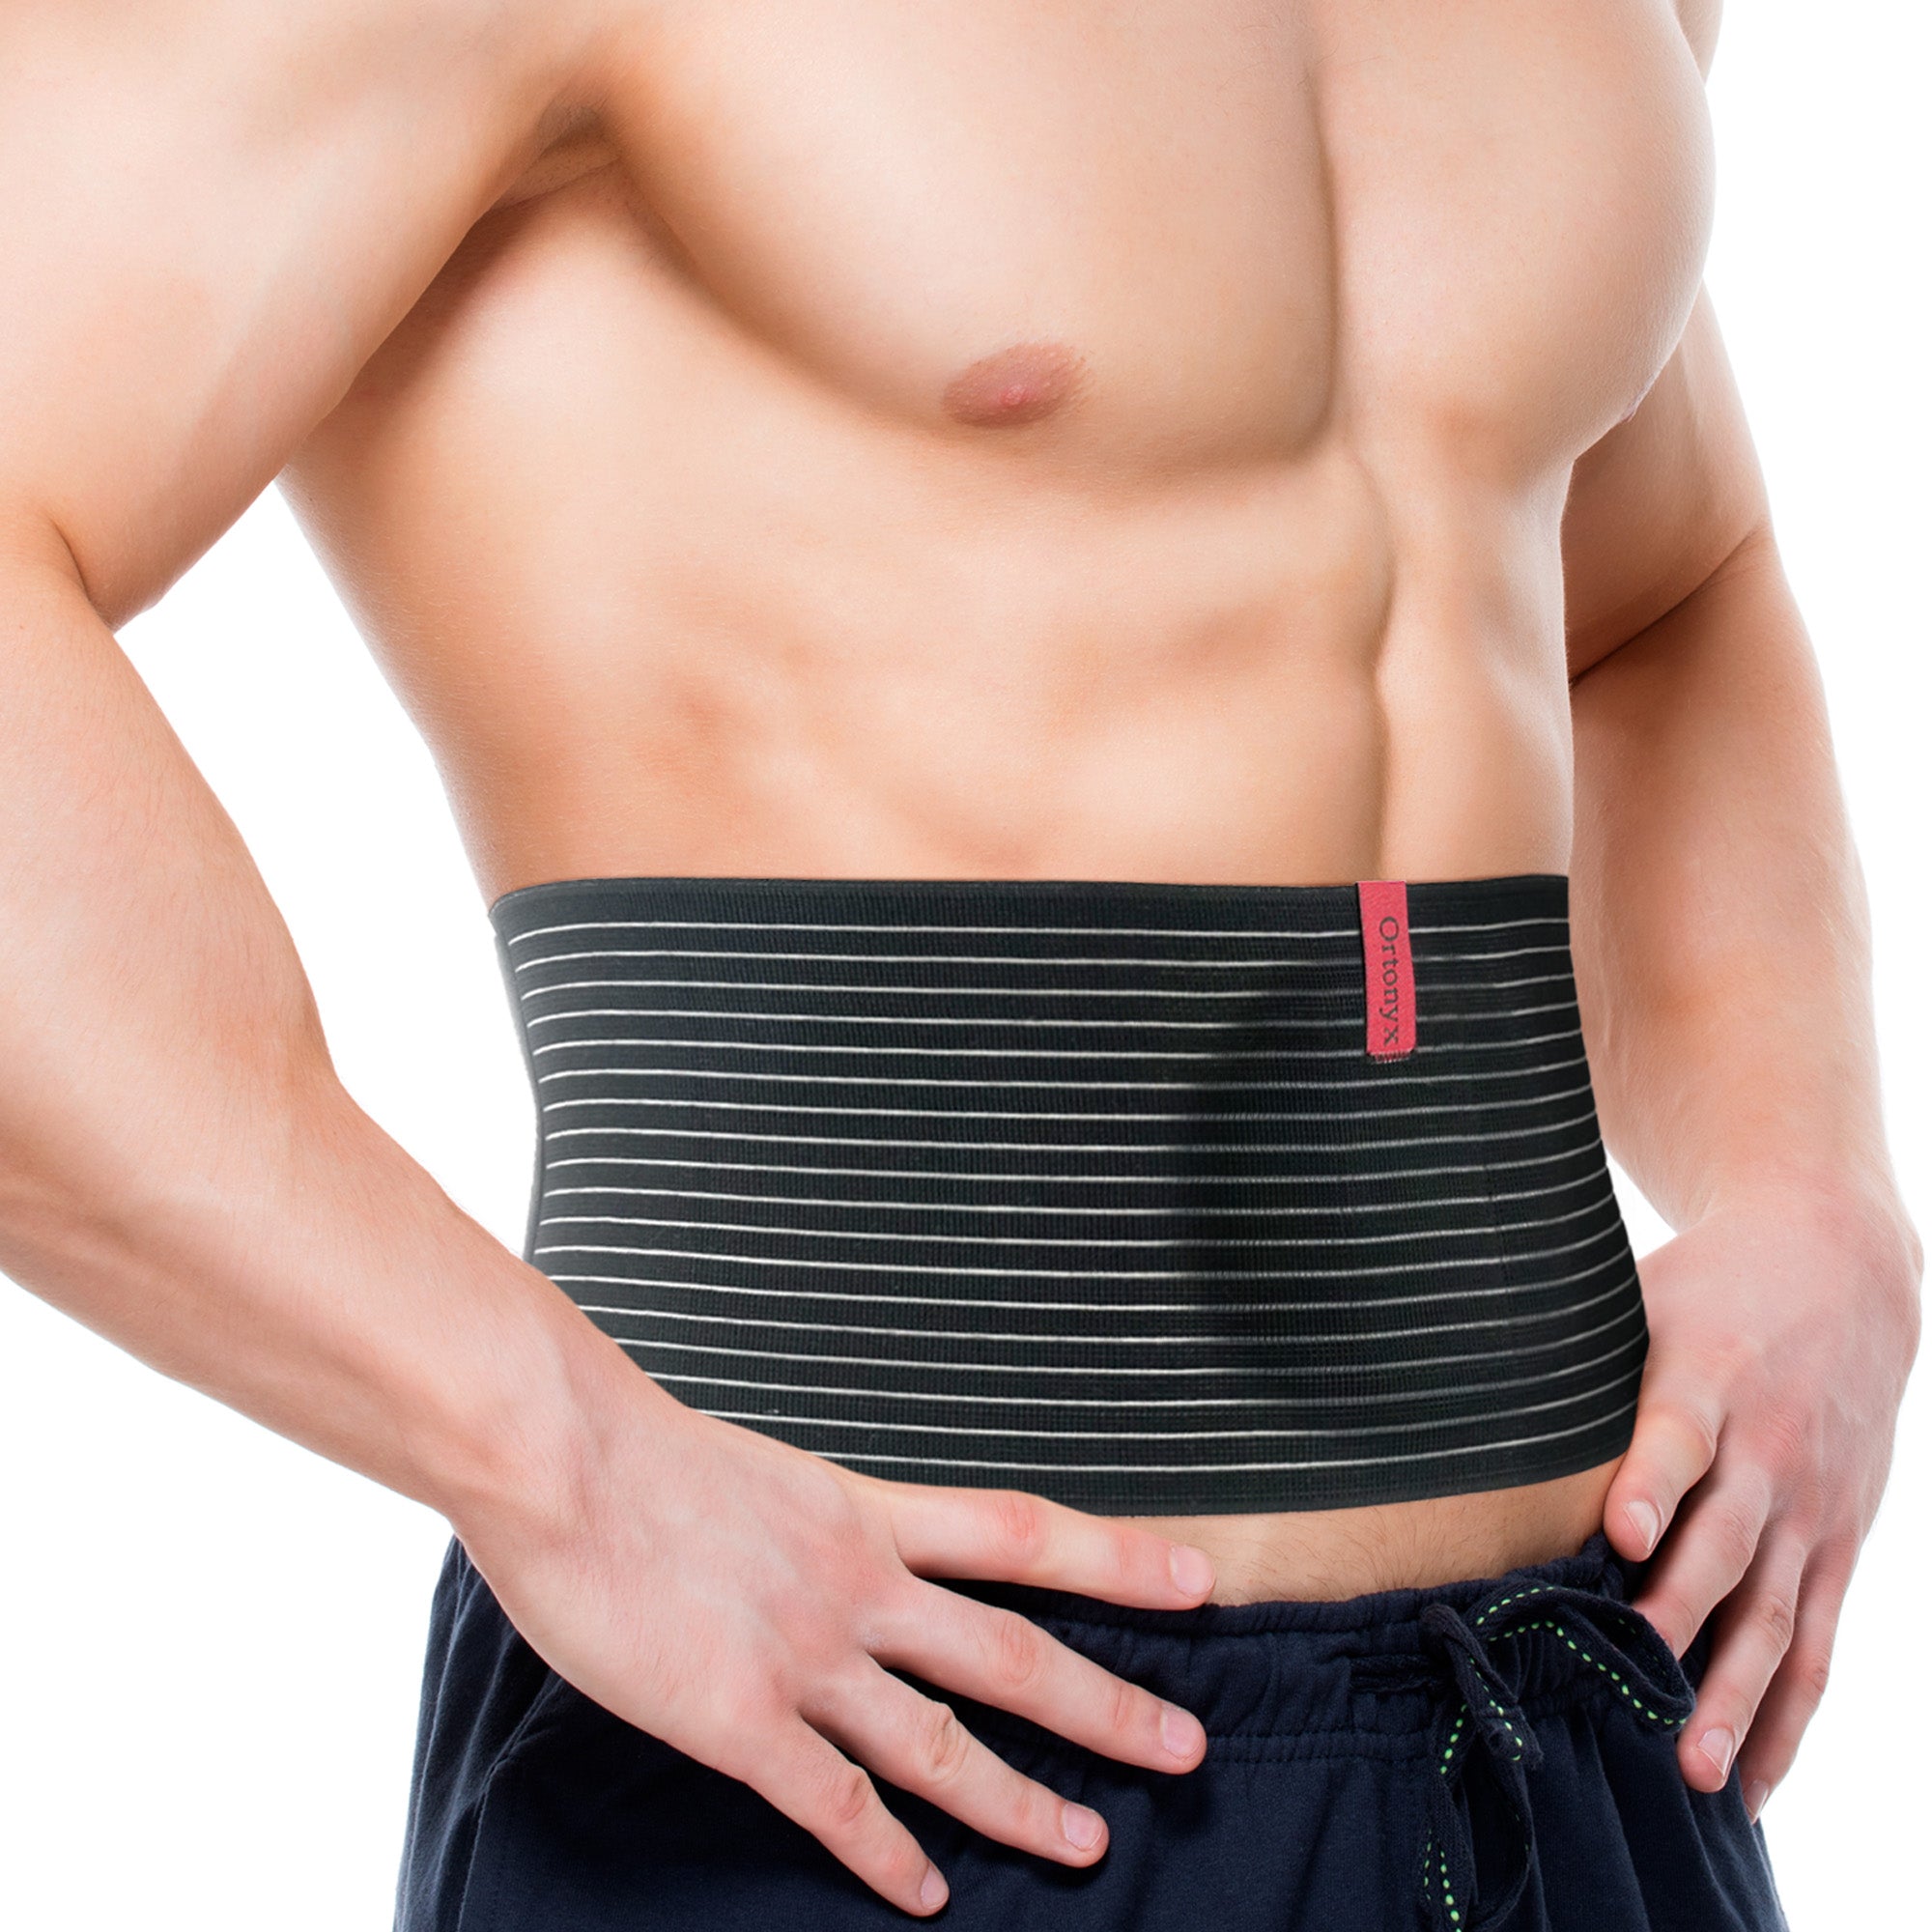 Belt for Umbilical Hernia Reduction - Removable Pillow